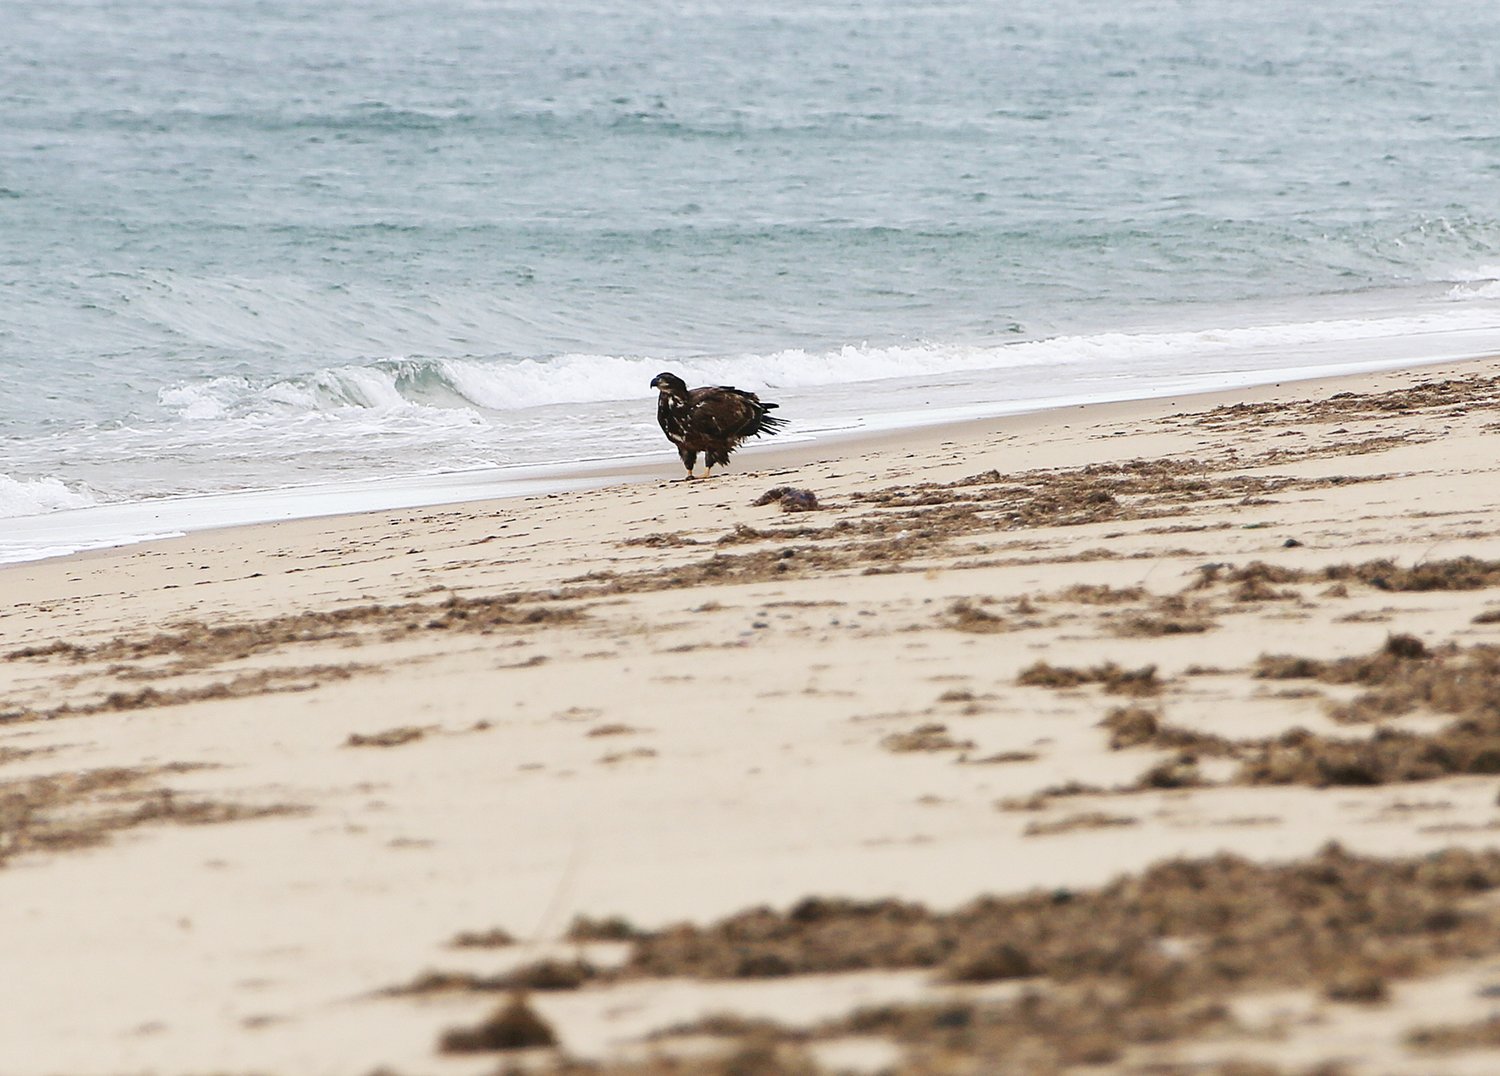 This immature Bald Eagle was seen by three birders this week, and photographed at the water’s edge on Sconset Beach.